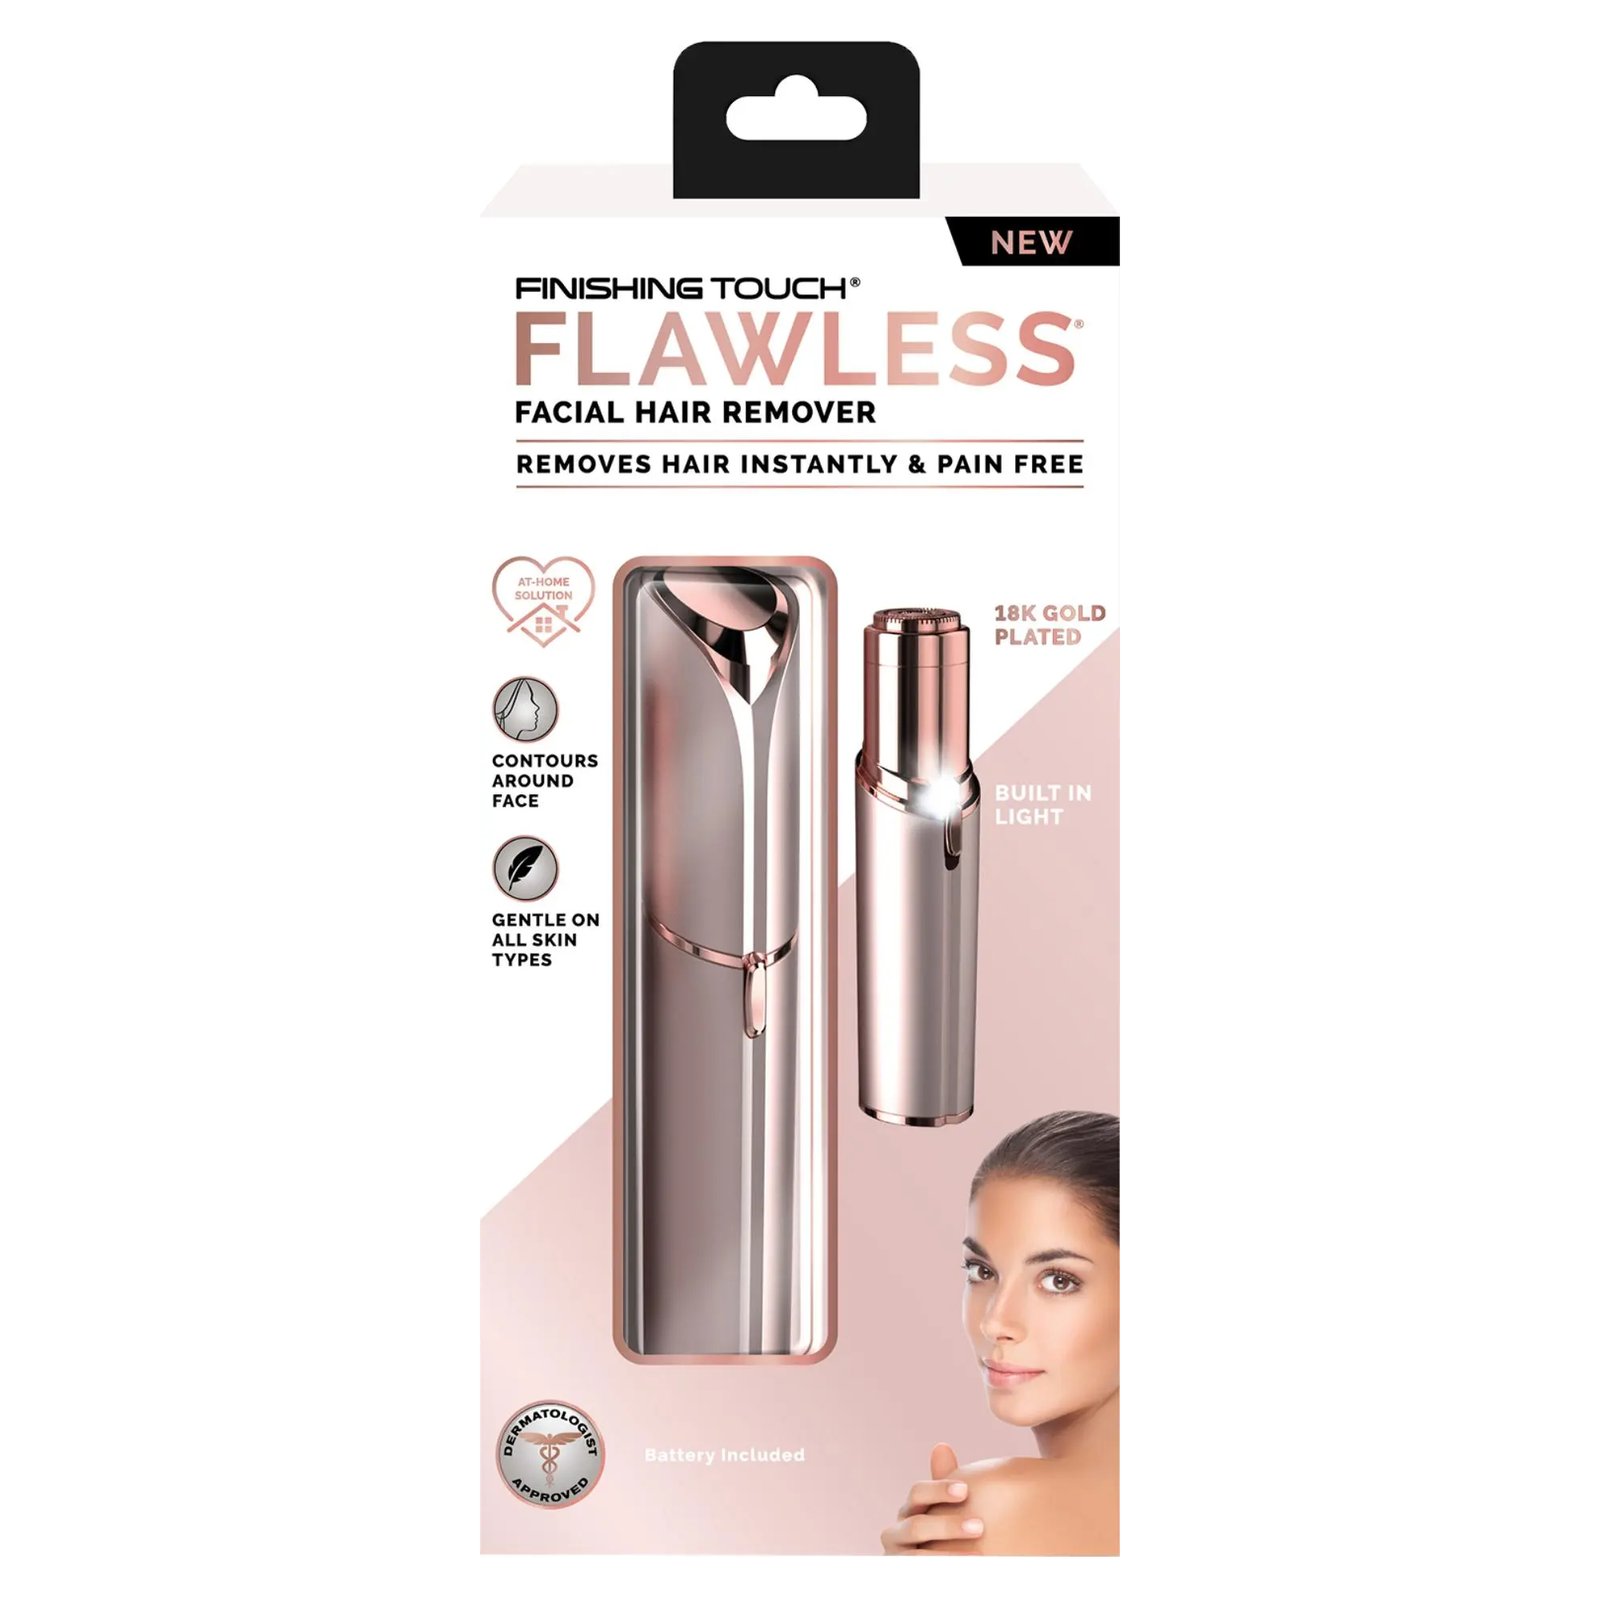 Finishing Touch Flawless Facial Hair Remover 1 st